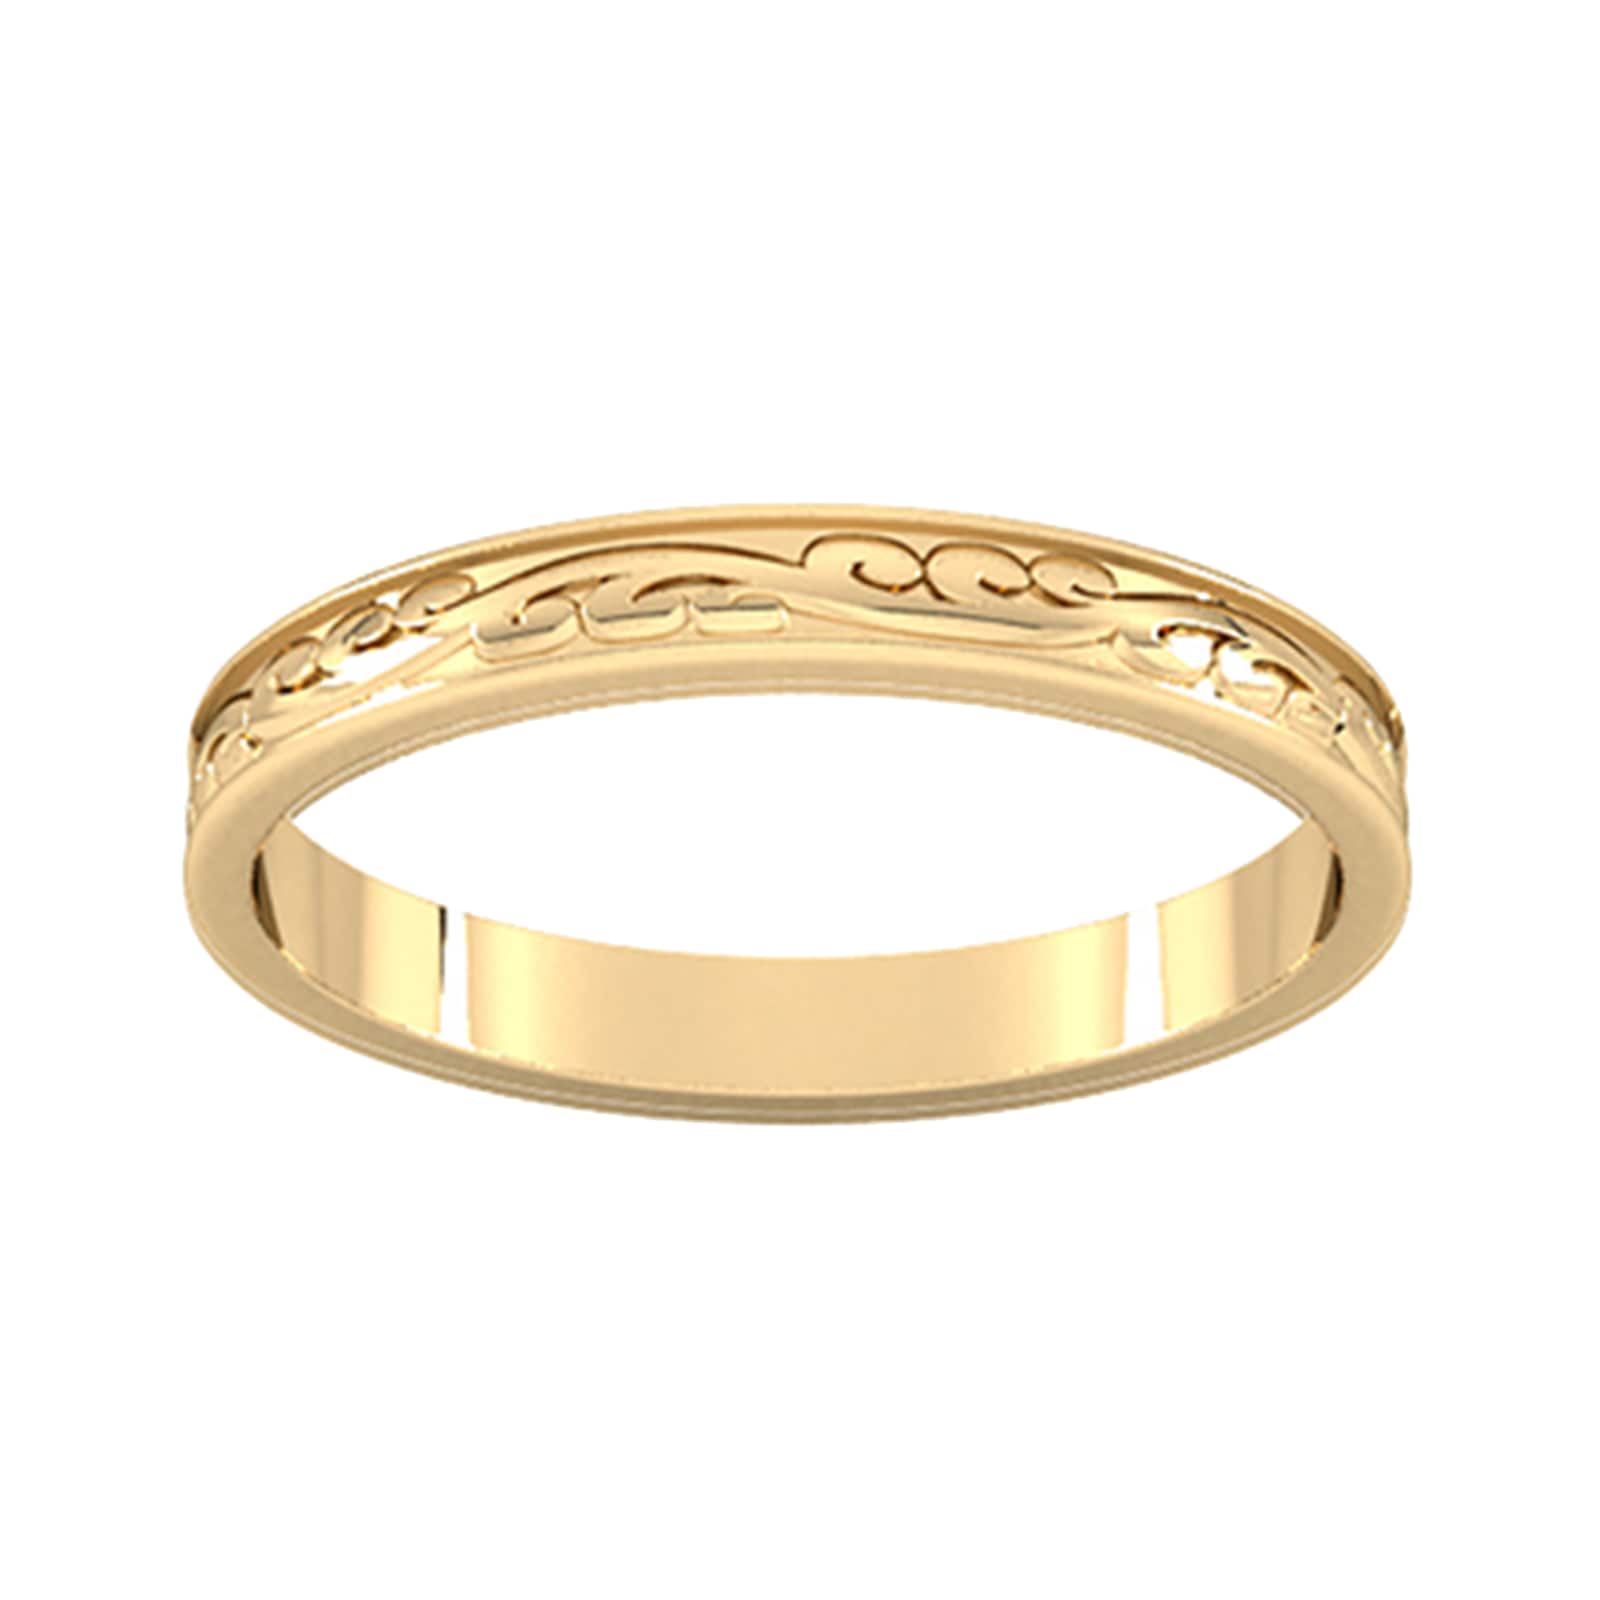 2.5mm Hand Engraved Wedding Ring In 18 Carat Yellow Gold - Ring Size X